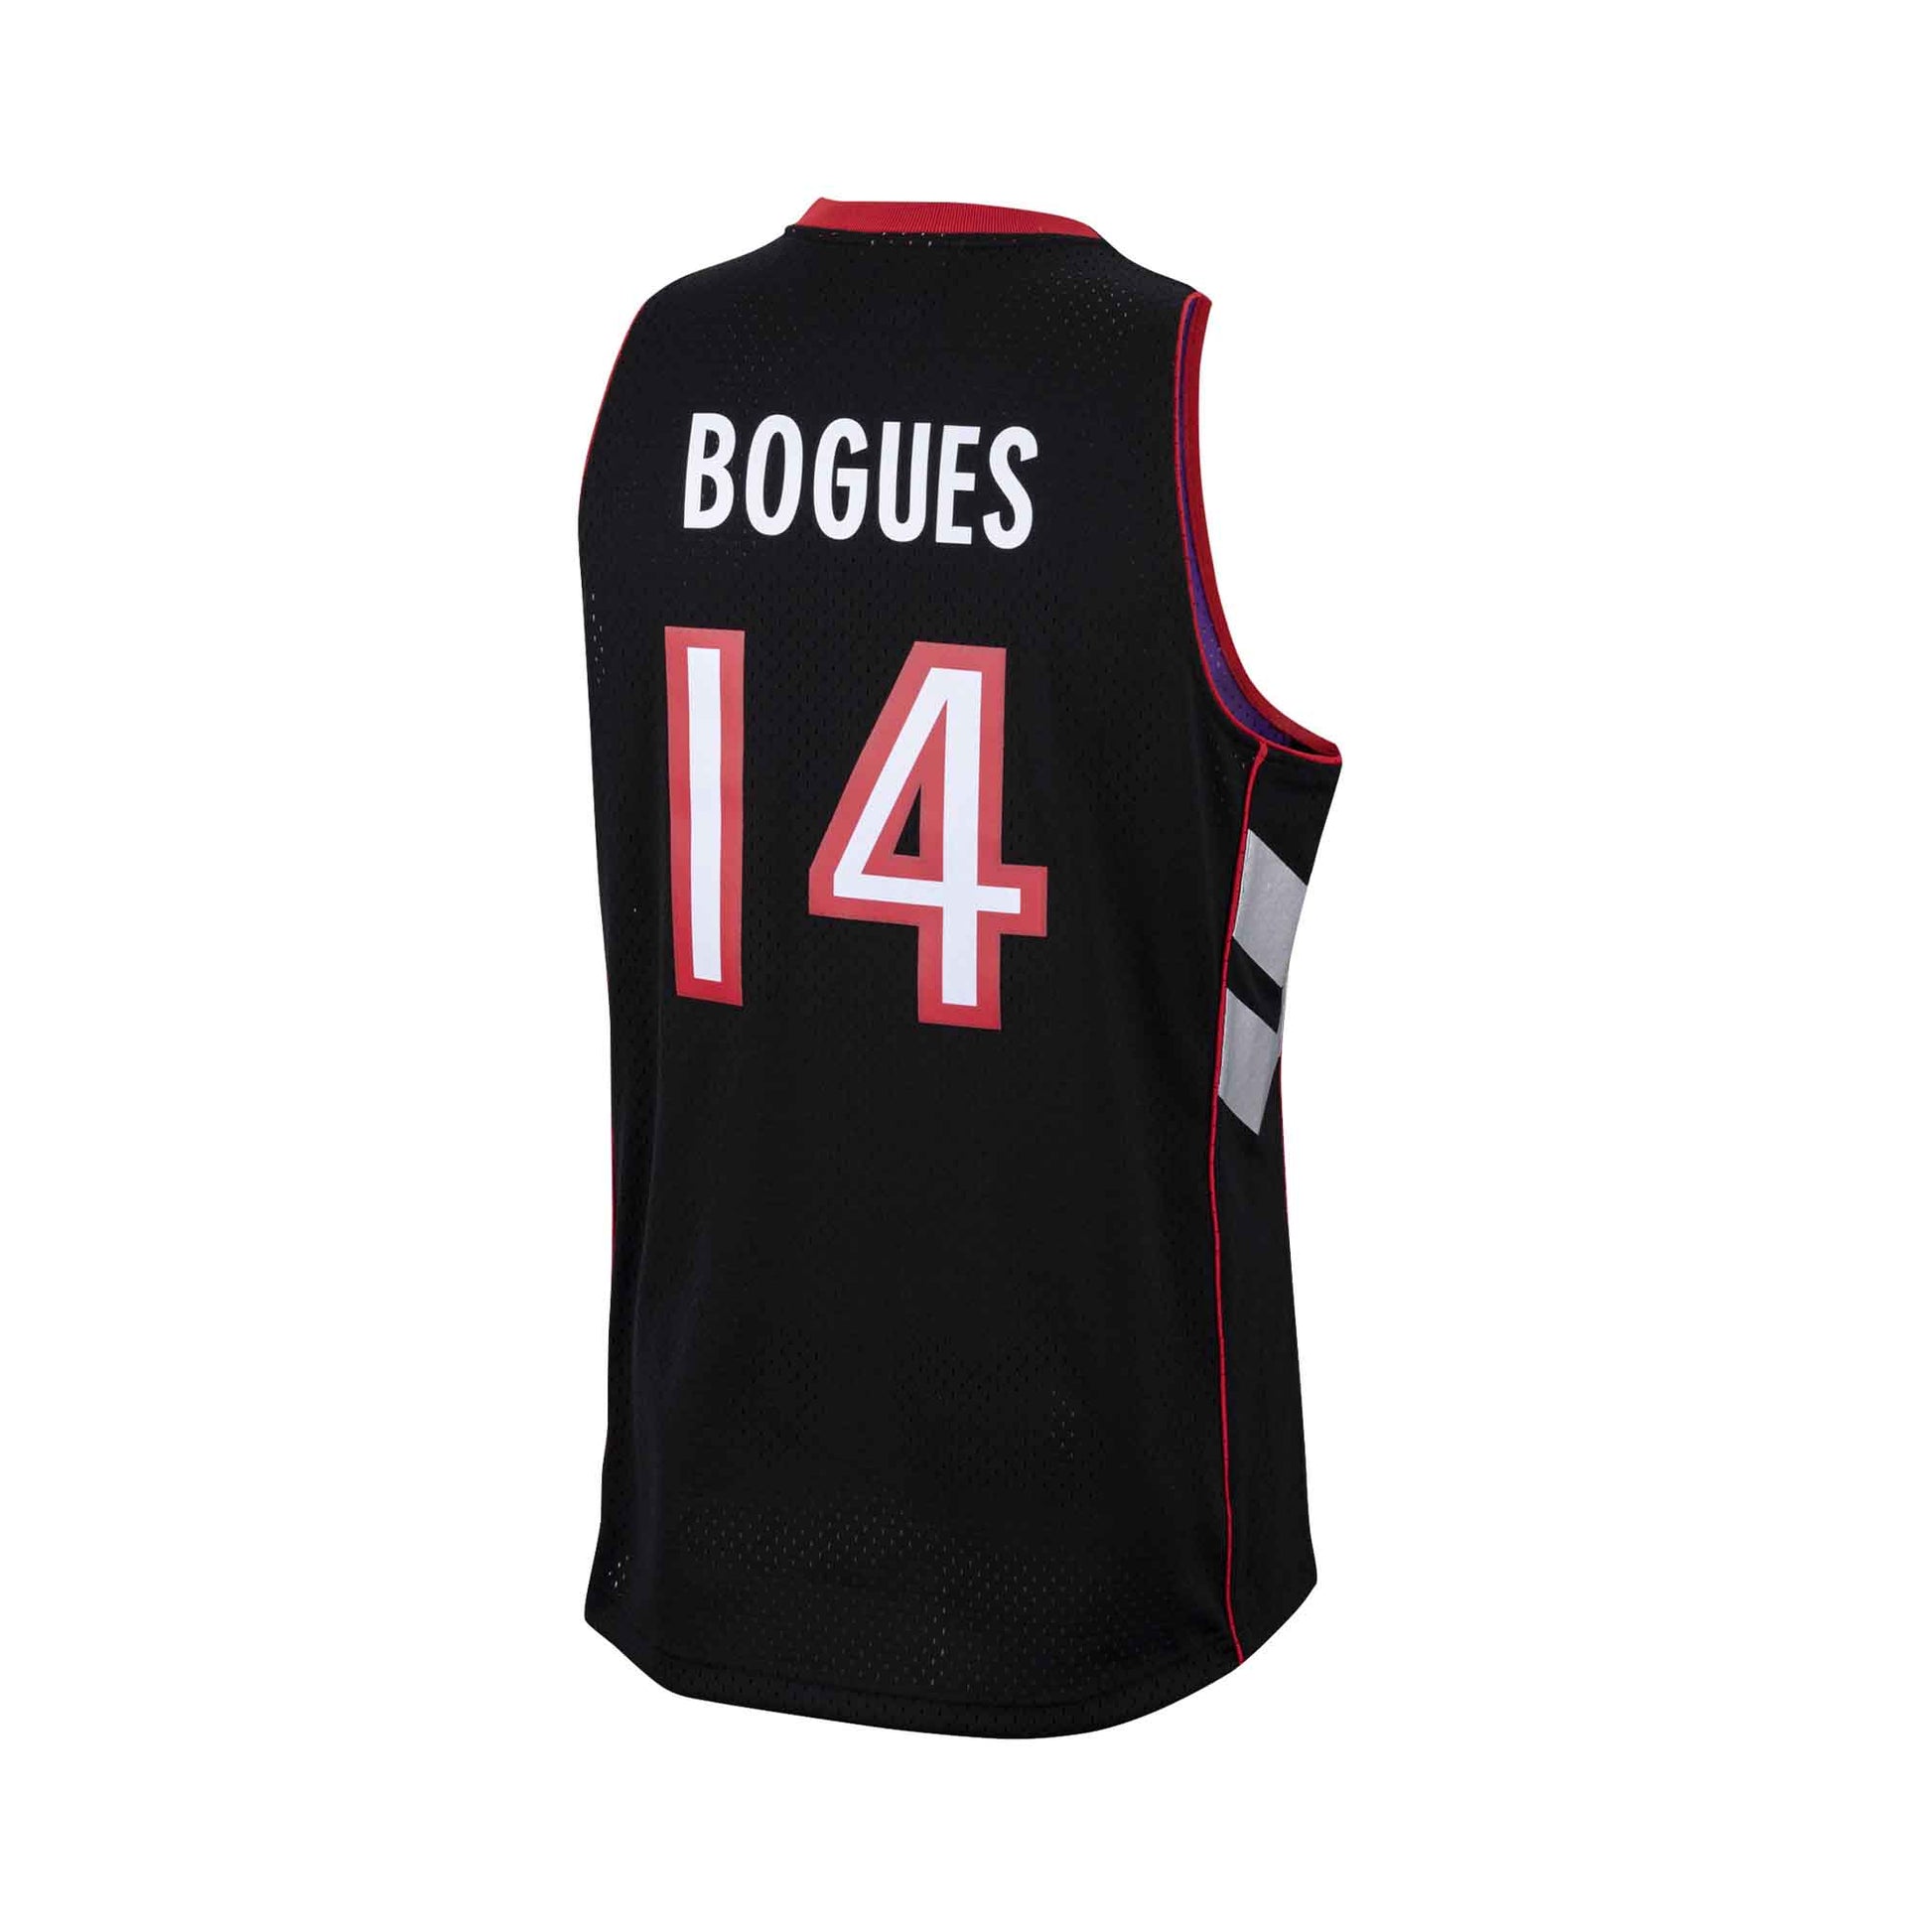 NBA Jersey Golden State Warriors Muggsy Bogues Champion Size 